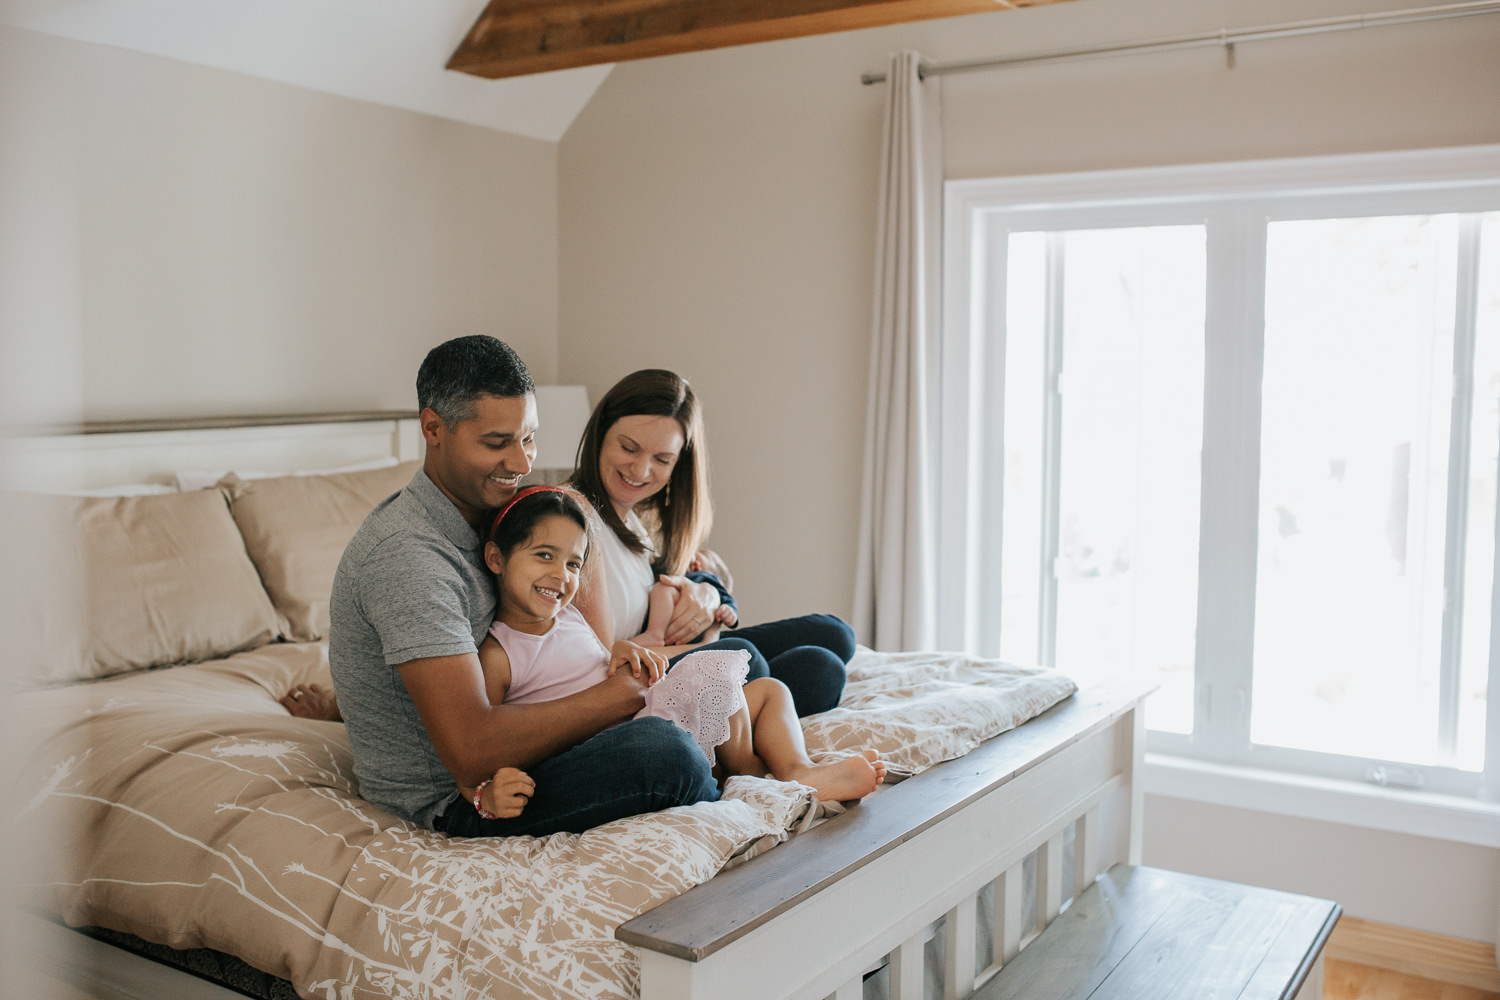 family of four sitting on bed, 4 year old toddler girl sitting in dad's lap smiling at camera, mom holding 2 week old baby boy and smiling at daughter - Markham Lifestyle Photography